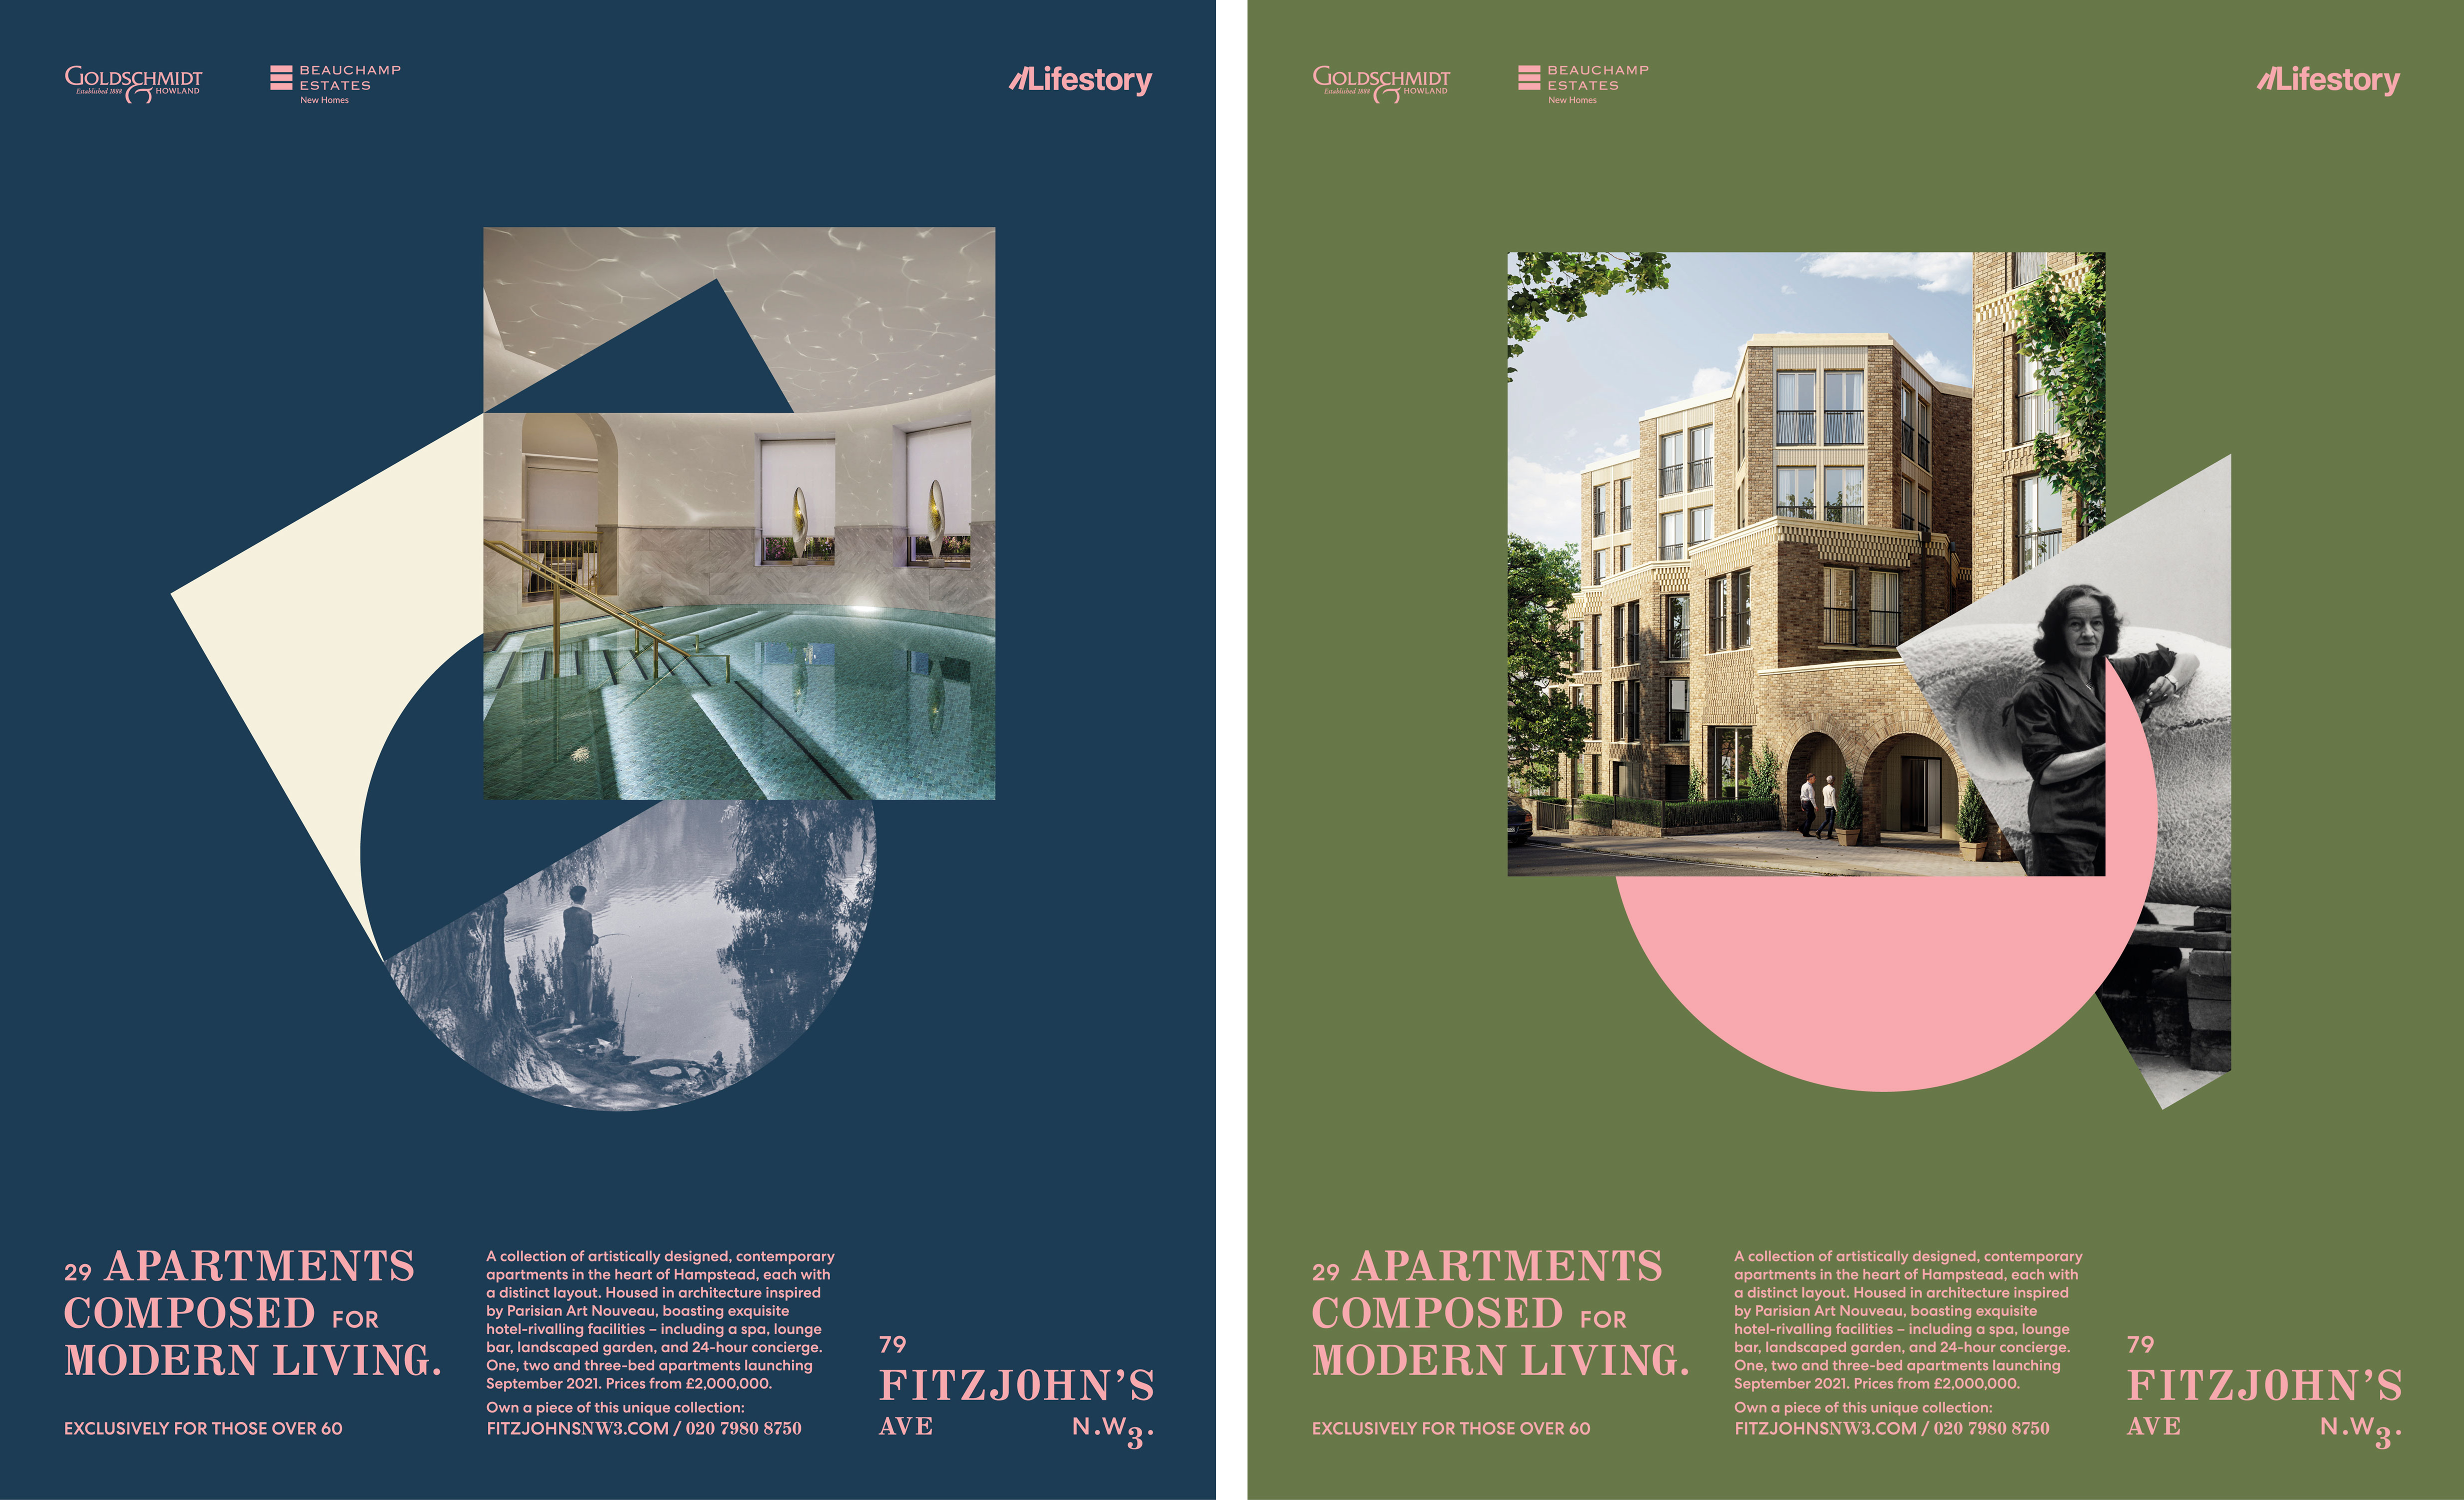 New visual identity for Hampstead property development Fitzjohn's designed by DutchScot.